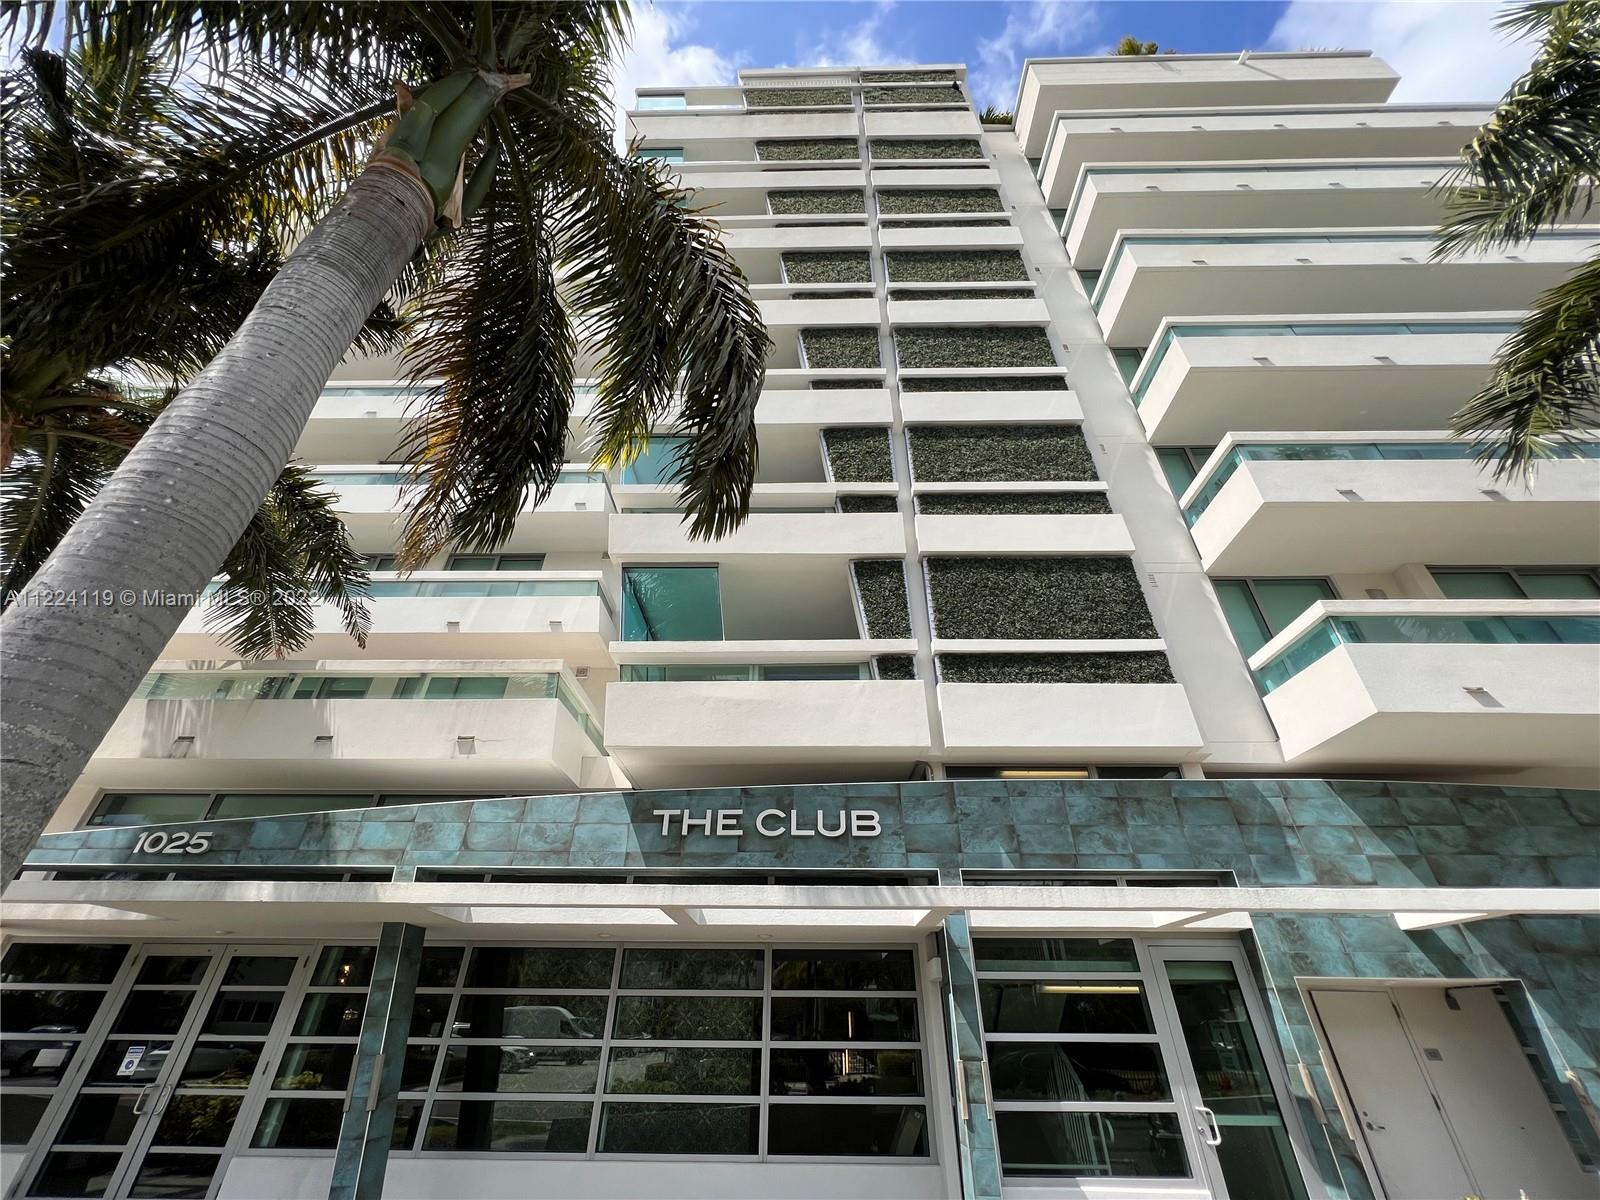 Beautiful 2/2 in the heart of Bay Harbor Islands. Close to everything! Do not miss out on this opportunity. Like new! Amazing top floor pool with 360 views of the island!